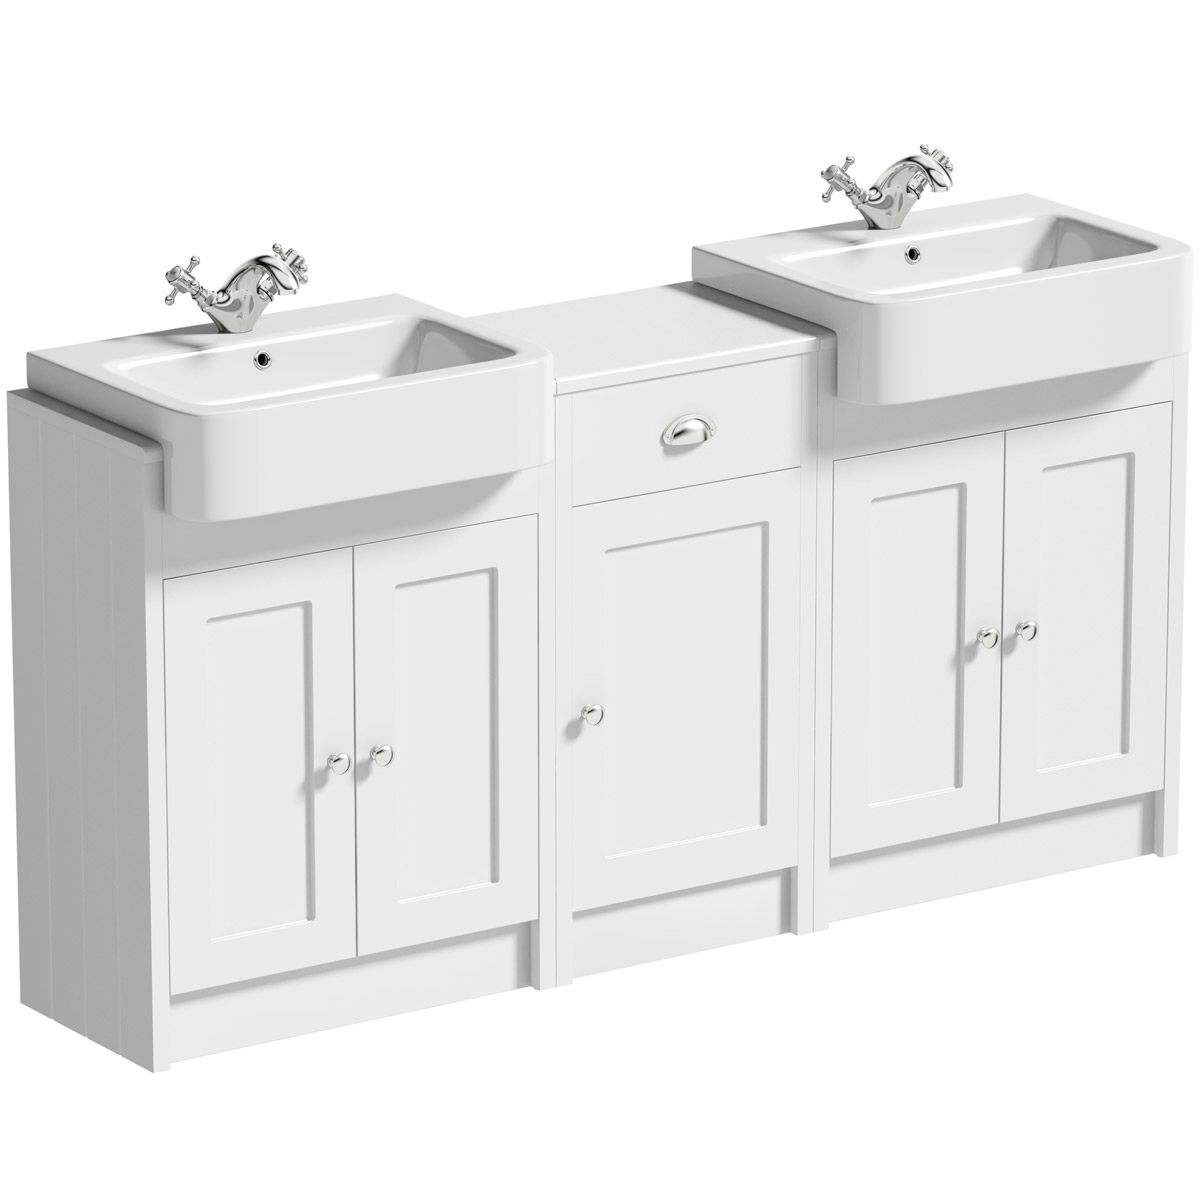 Orchard Dulwich matt white floorstanding double vanity unit and basin with storage combination